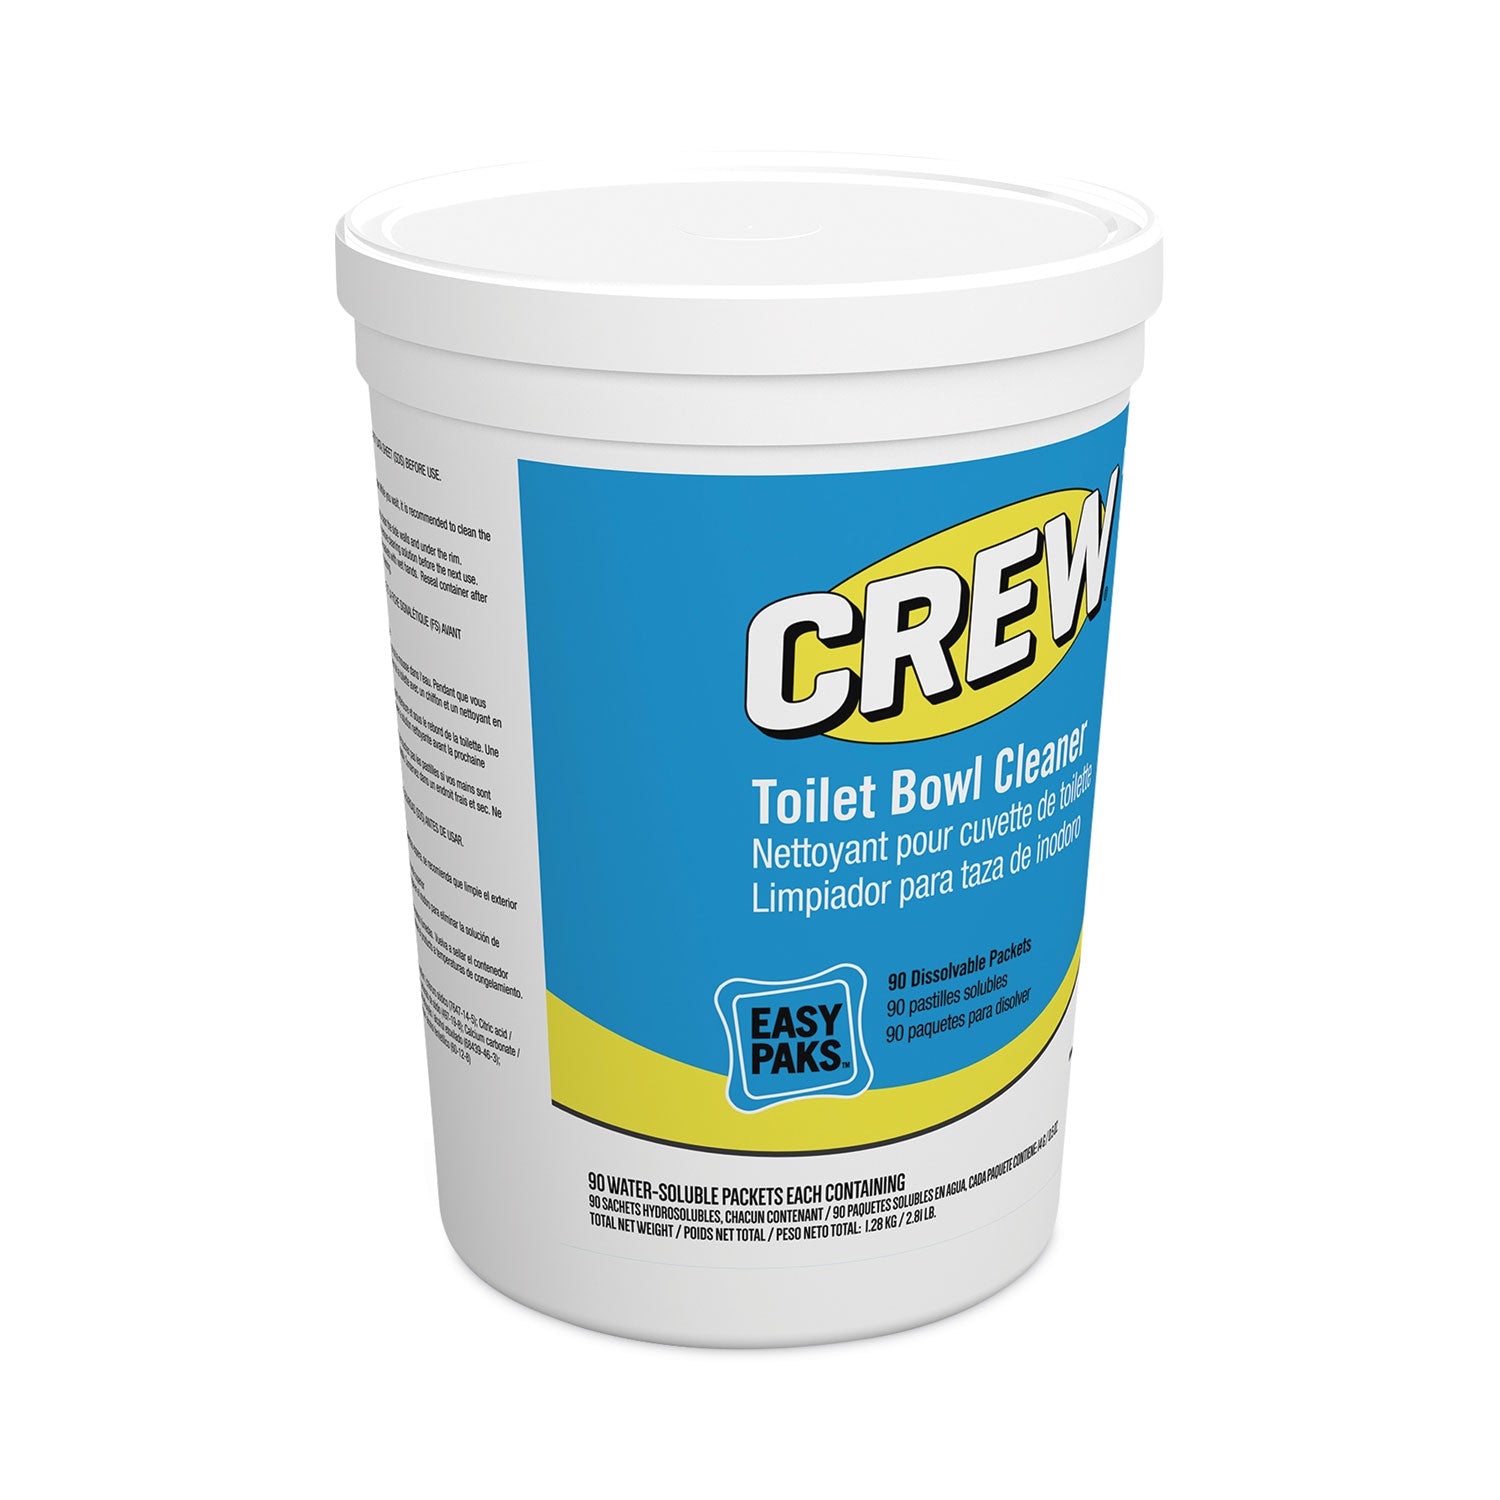 crew-easy-paks-toilet-bowl-cleaner-fresh-floral-scent-05-oz-packet-90-packets-tub-2-tubs-carton_dvocbd540731 - 3